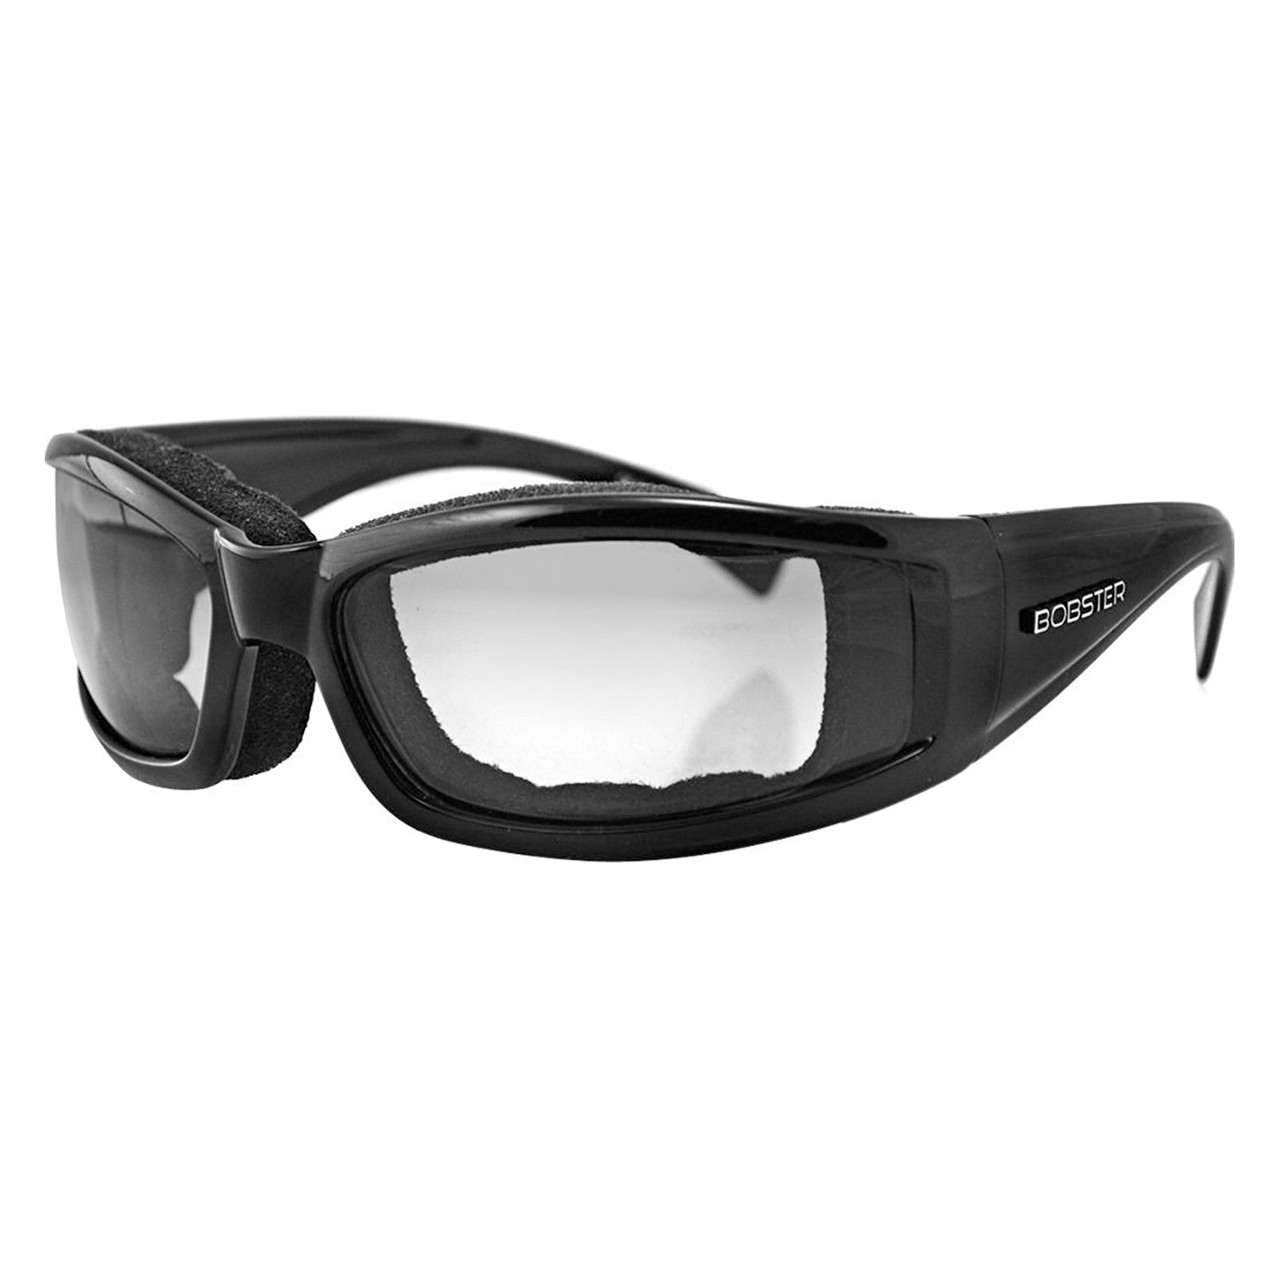 Global Vision Sly Padded Motorcycle Sunglasses Black Riding Glasses for Men  or Women